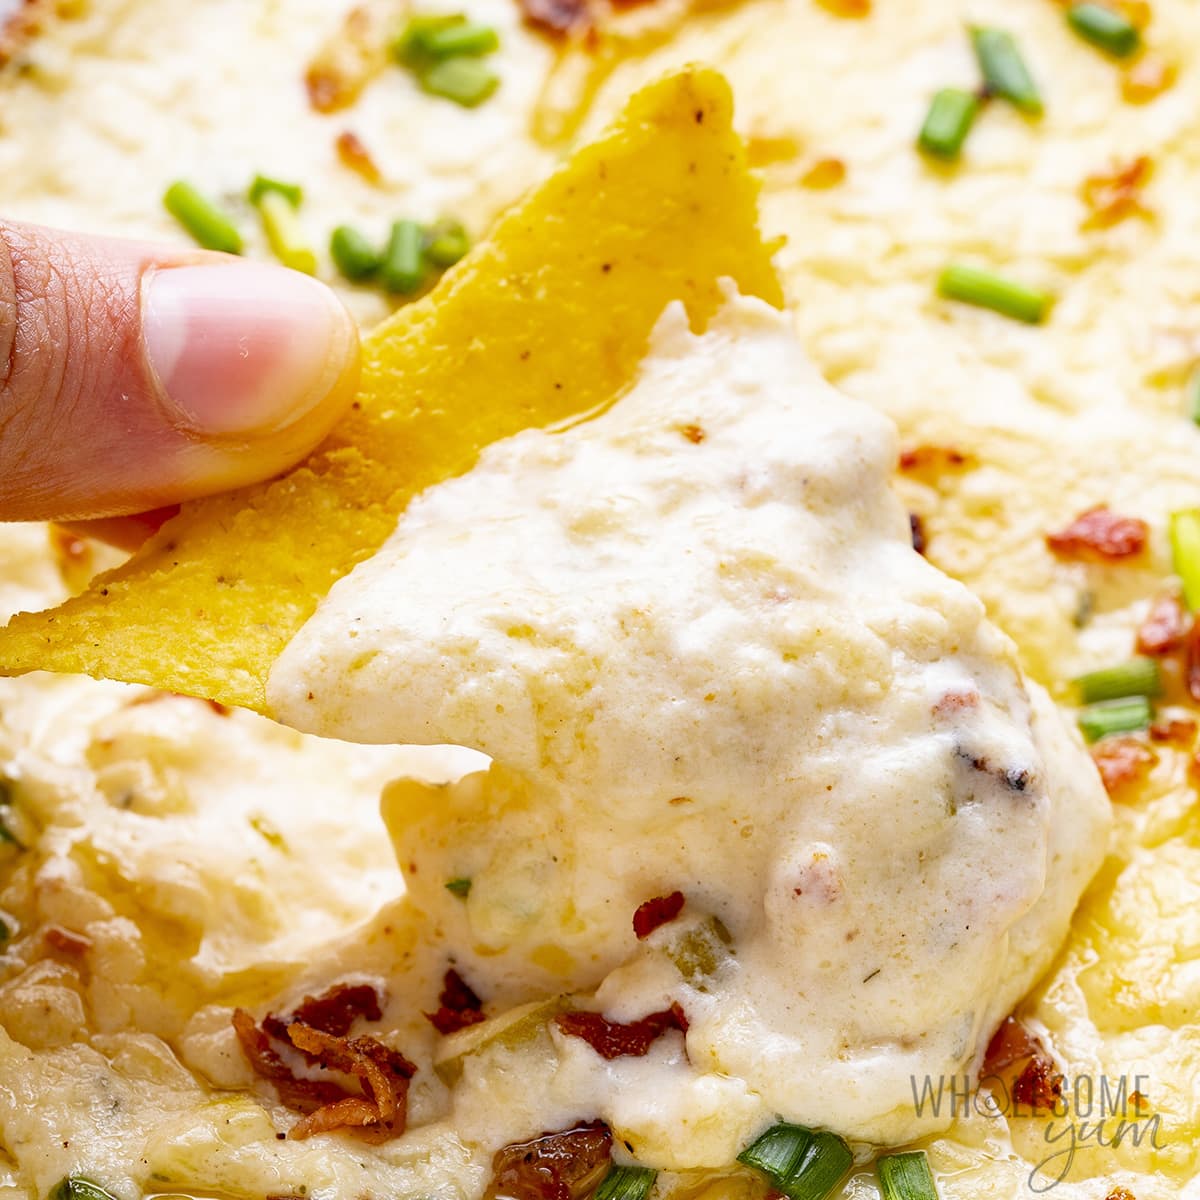 Warm Ranch Crack Dip Recipe with Bacon and Cream Cheese